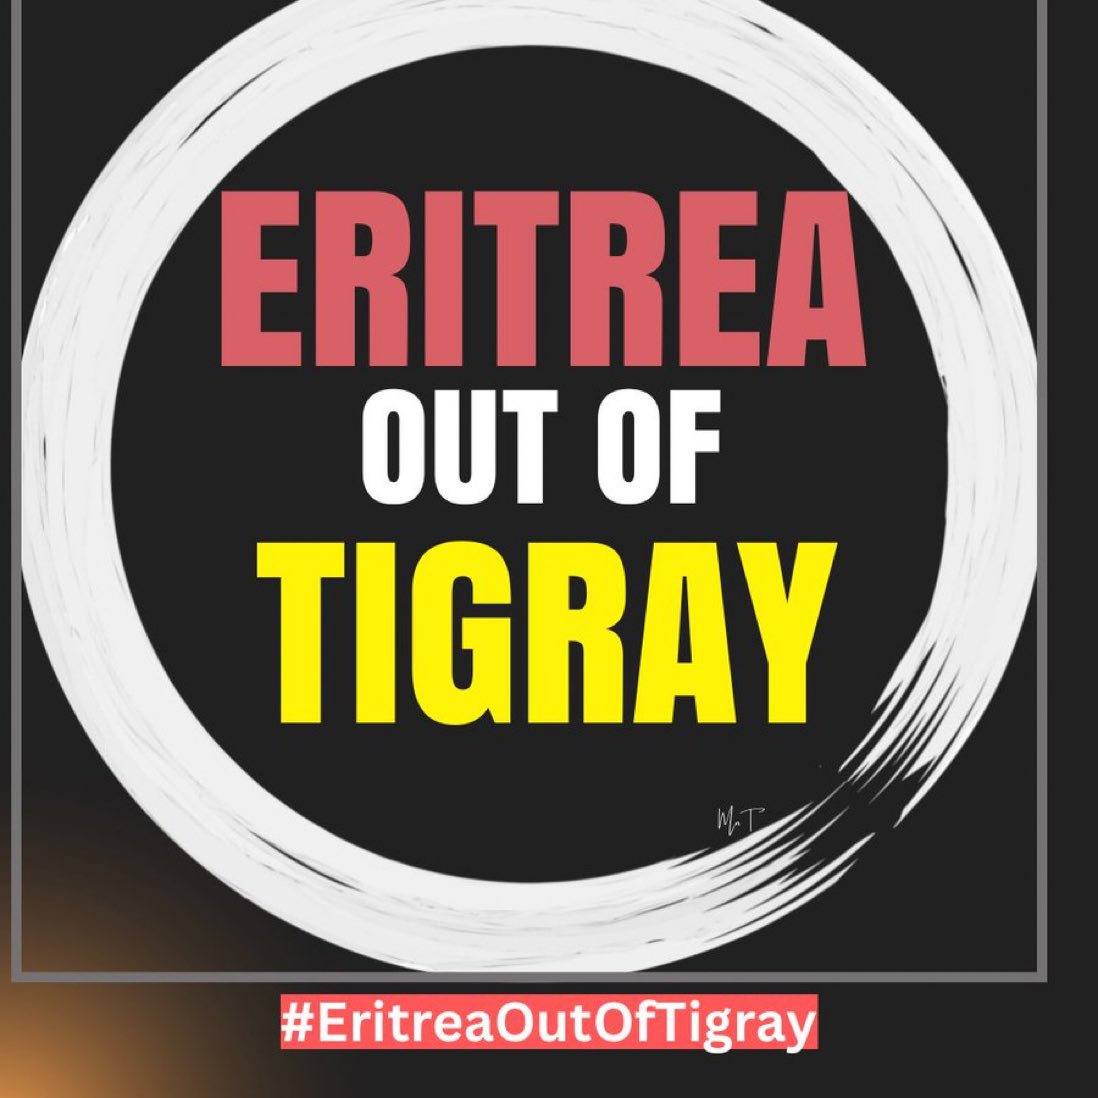 🇪🇷 troops must leave #Tigray and should not be allowed to continue their mission of destruction & #TigrayGenocide that’s happening in complete blackout. #EritreaOutOfTigray #Justice4TigraysWomenAndGirls @UN_HRC @POTUS @SecBlinken @EUCouncil @UNHumanRights @amnesty @_AfricanUnion